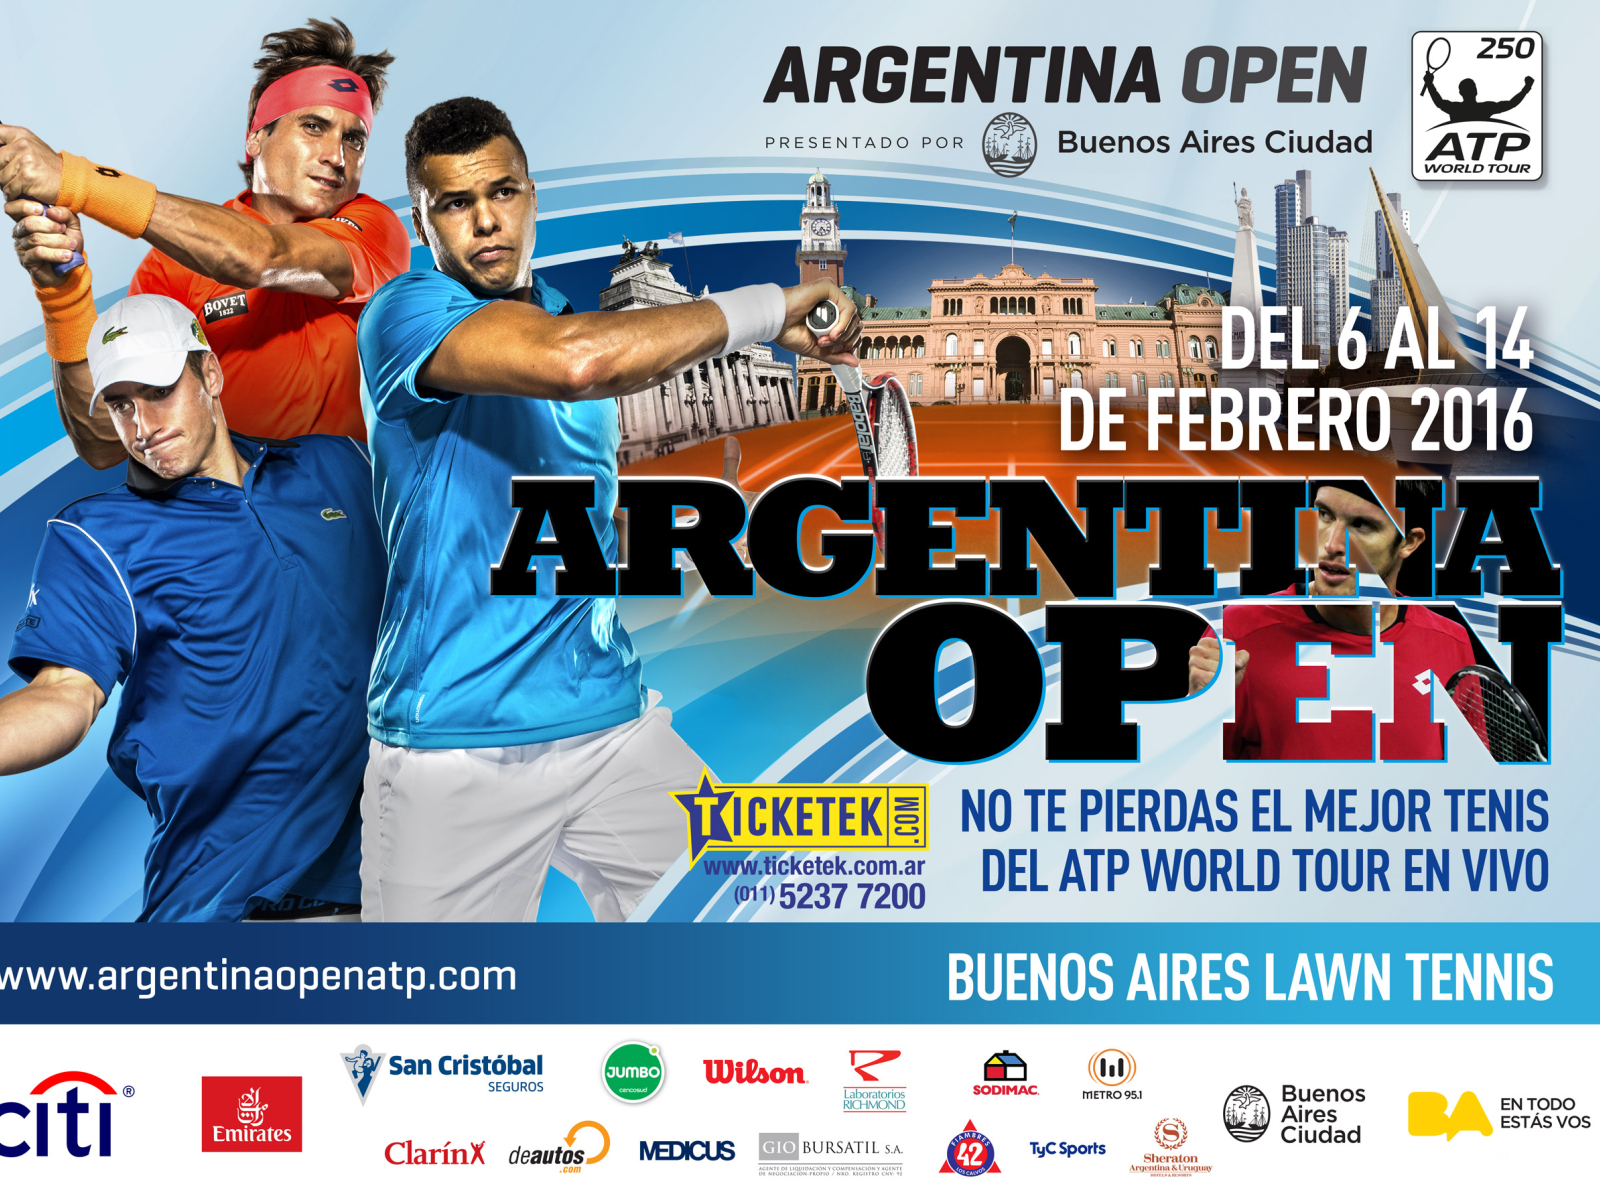 ATP Argentina Open Poster by Julian Abal on Dribbble